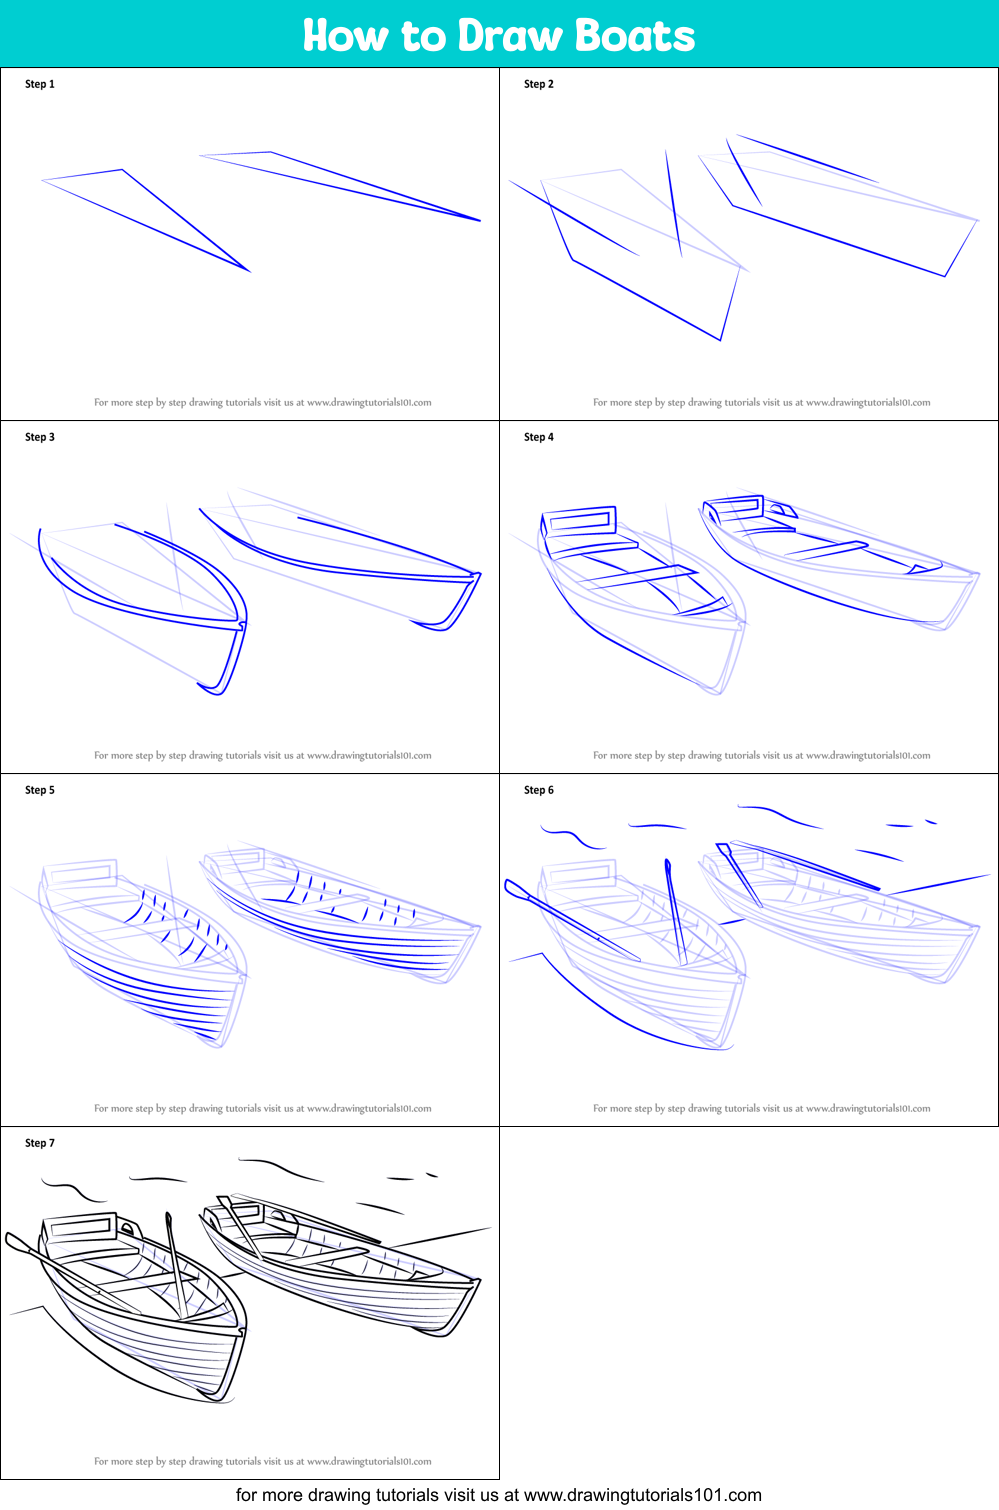 How to Draw Boats printable step by step drawing sheet